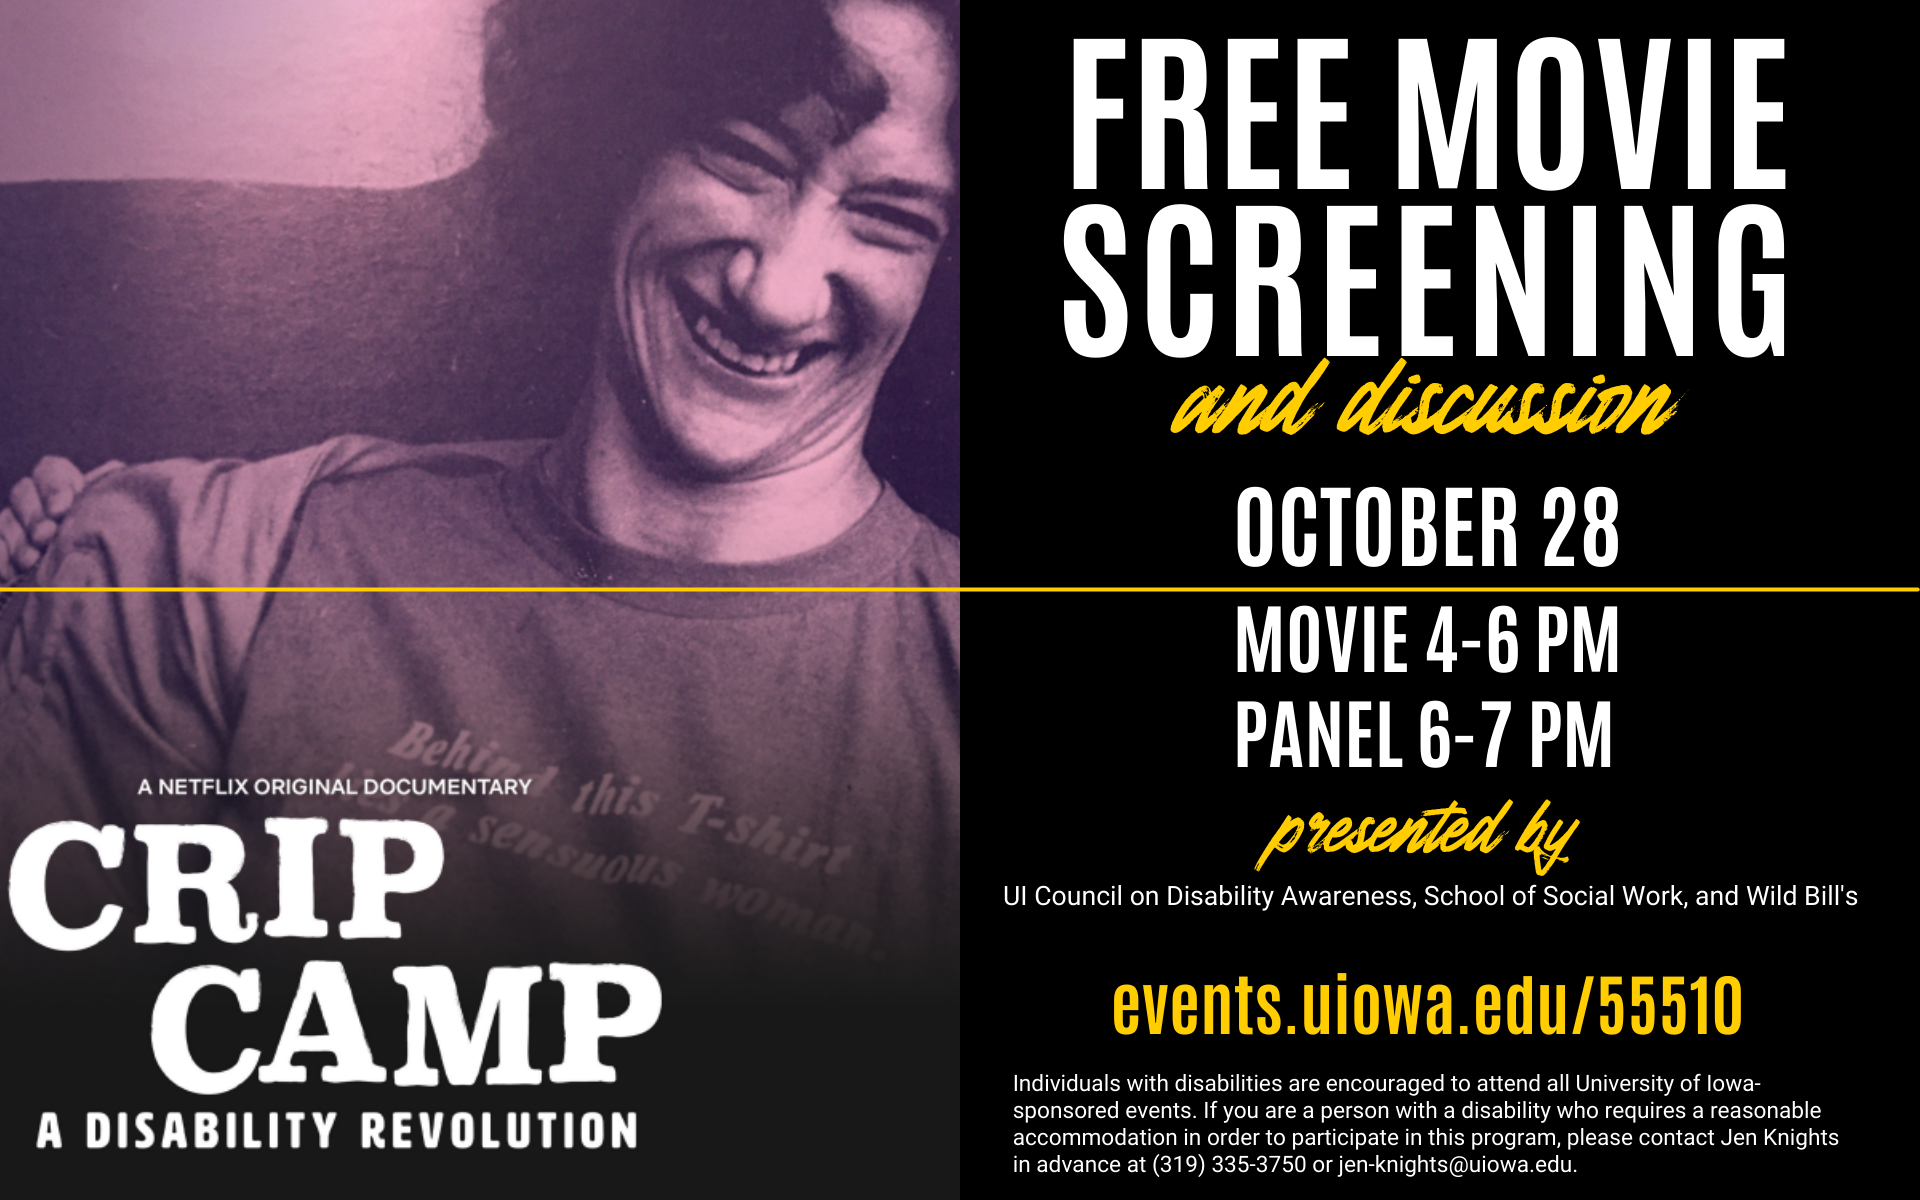 Crip Camp Free Movie Screening with discussion